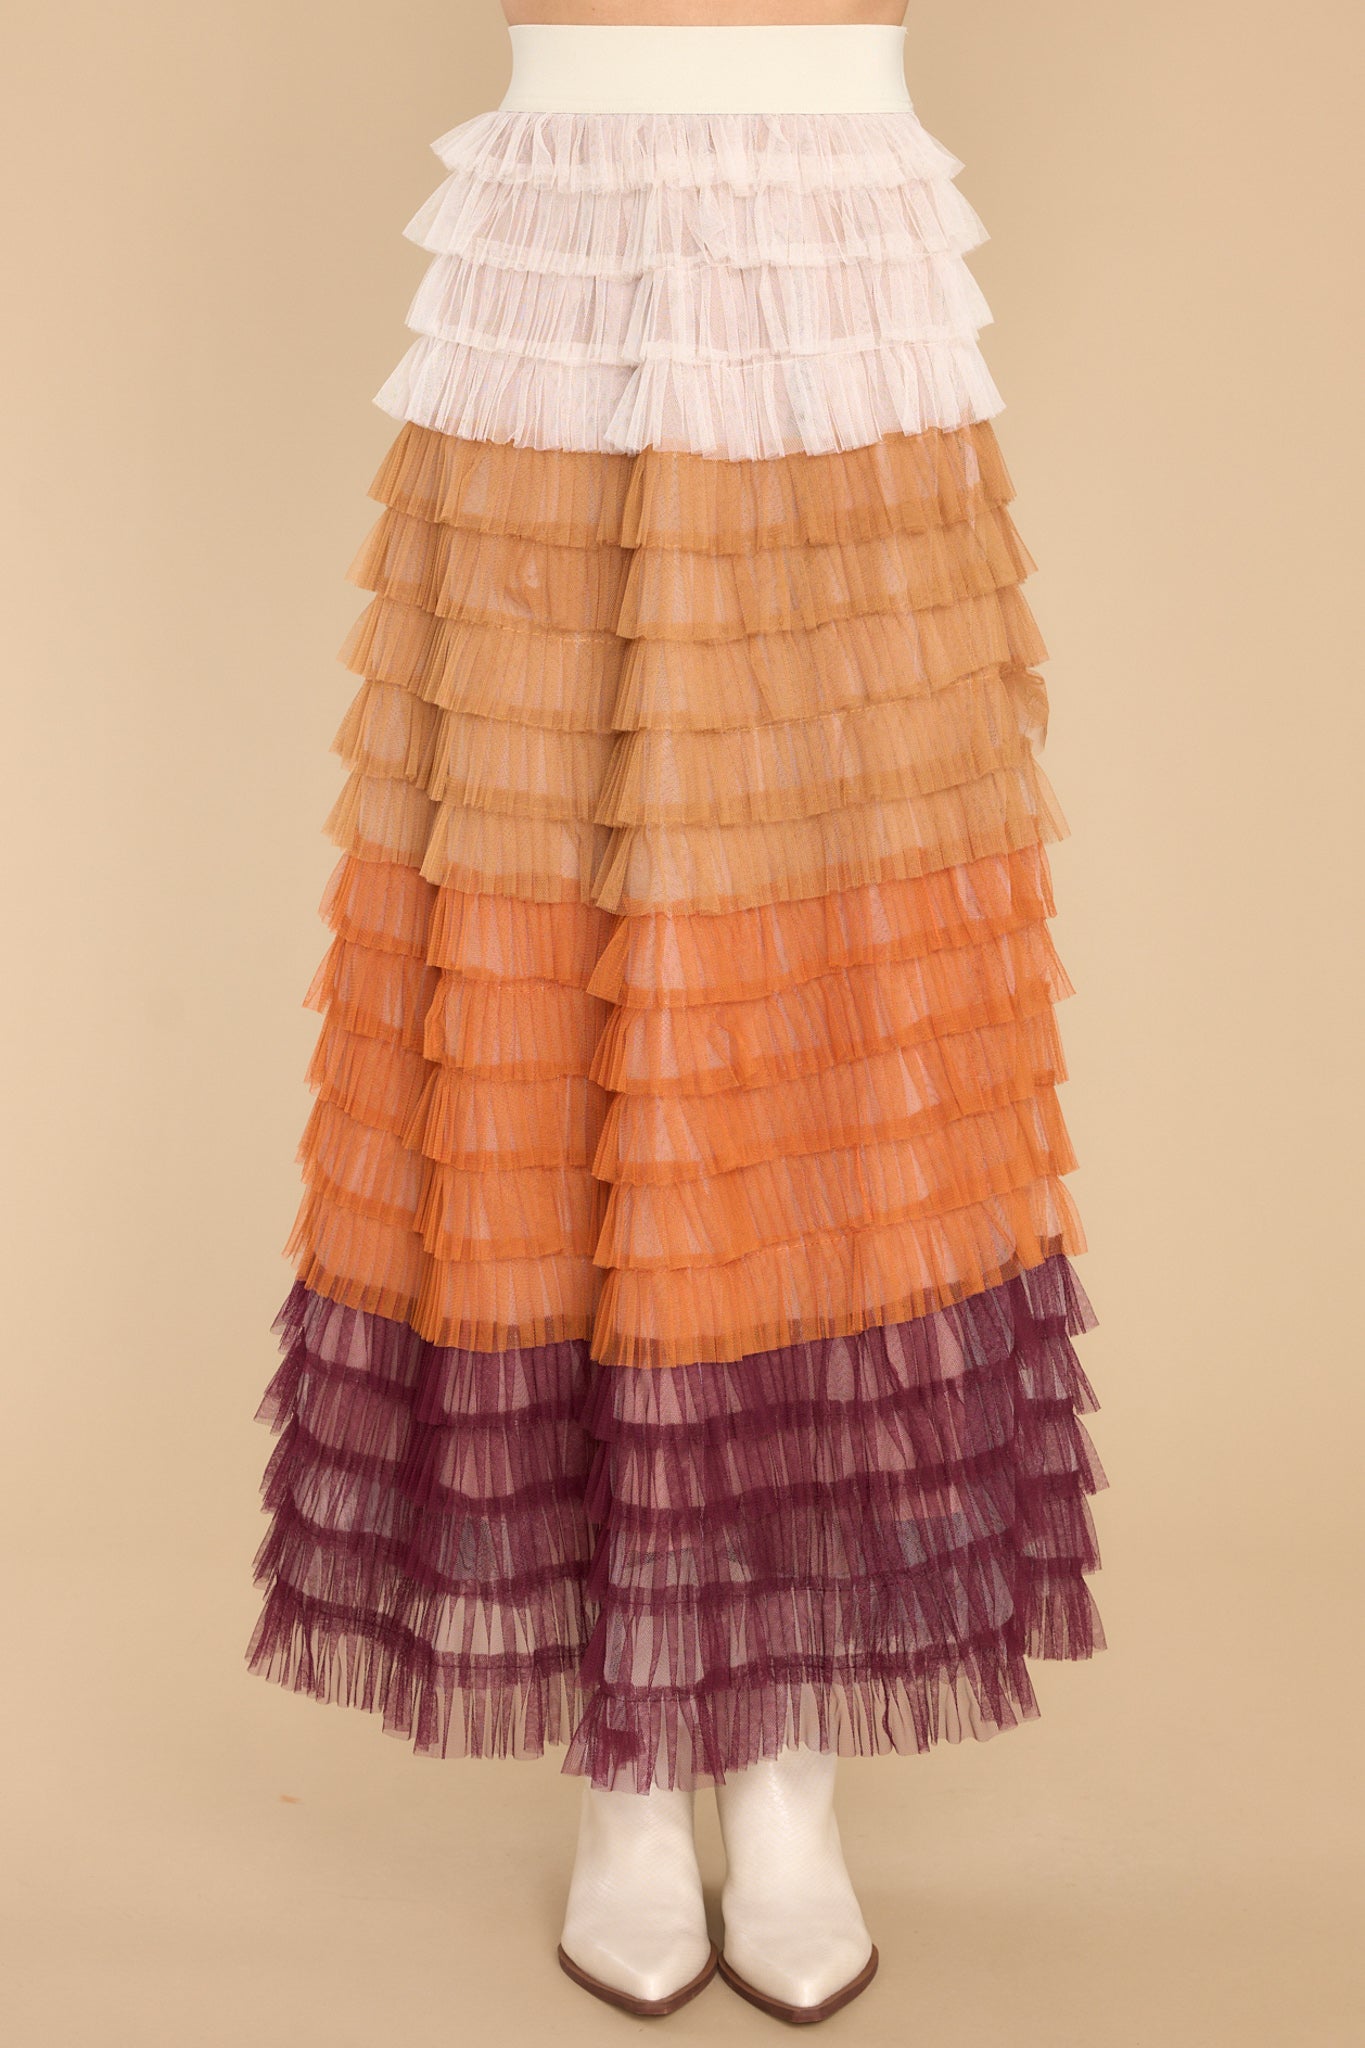 Front view of this skirt that showcases the shades of cream, orange, and burgundy.